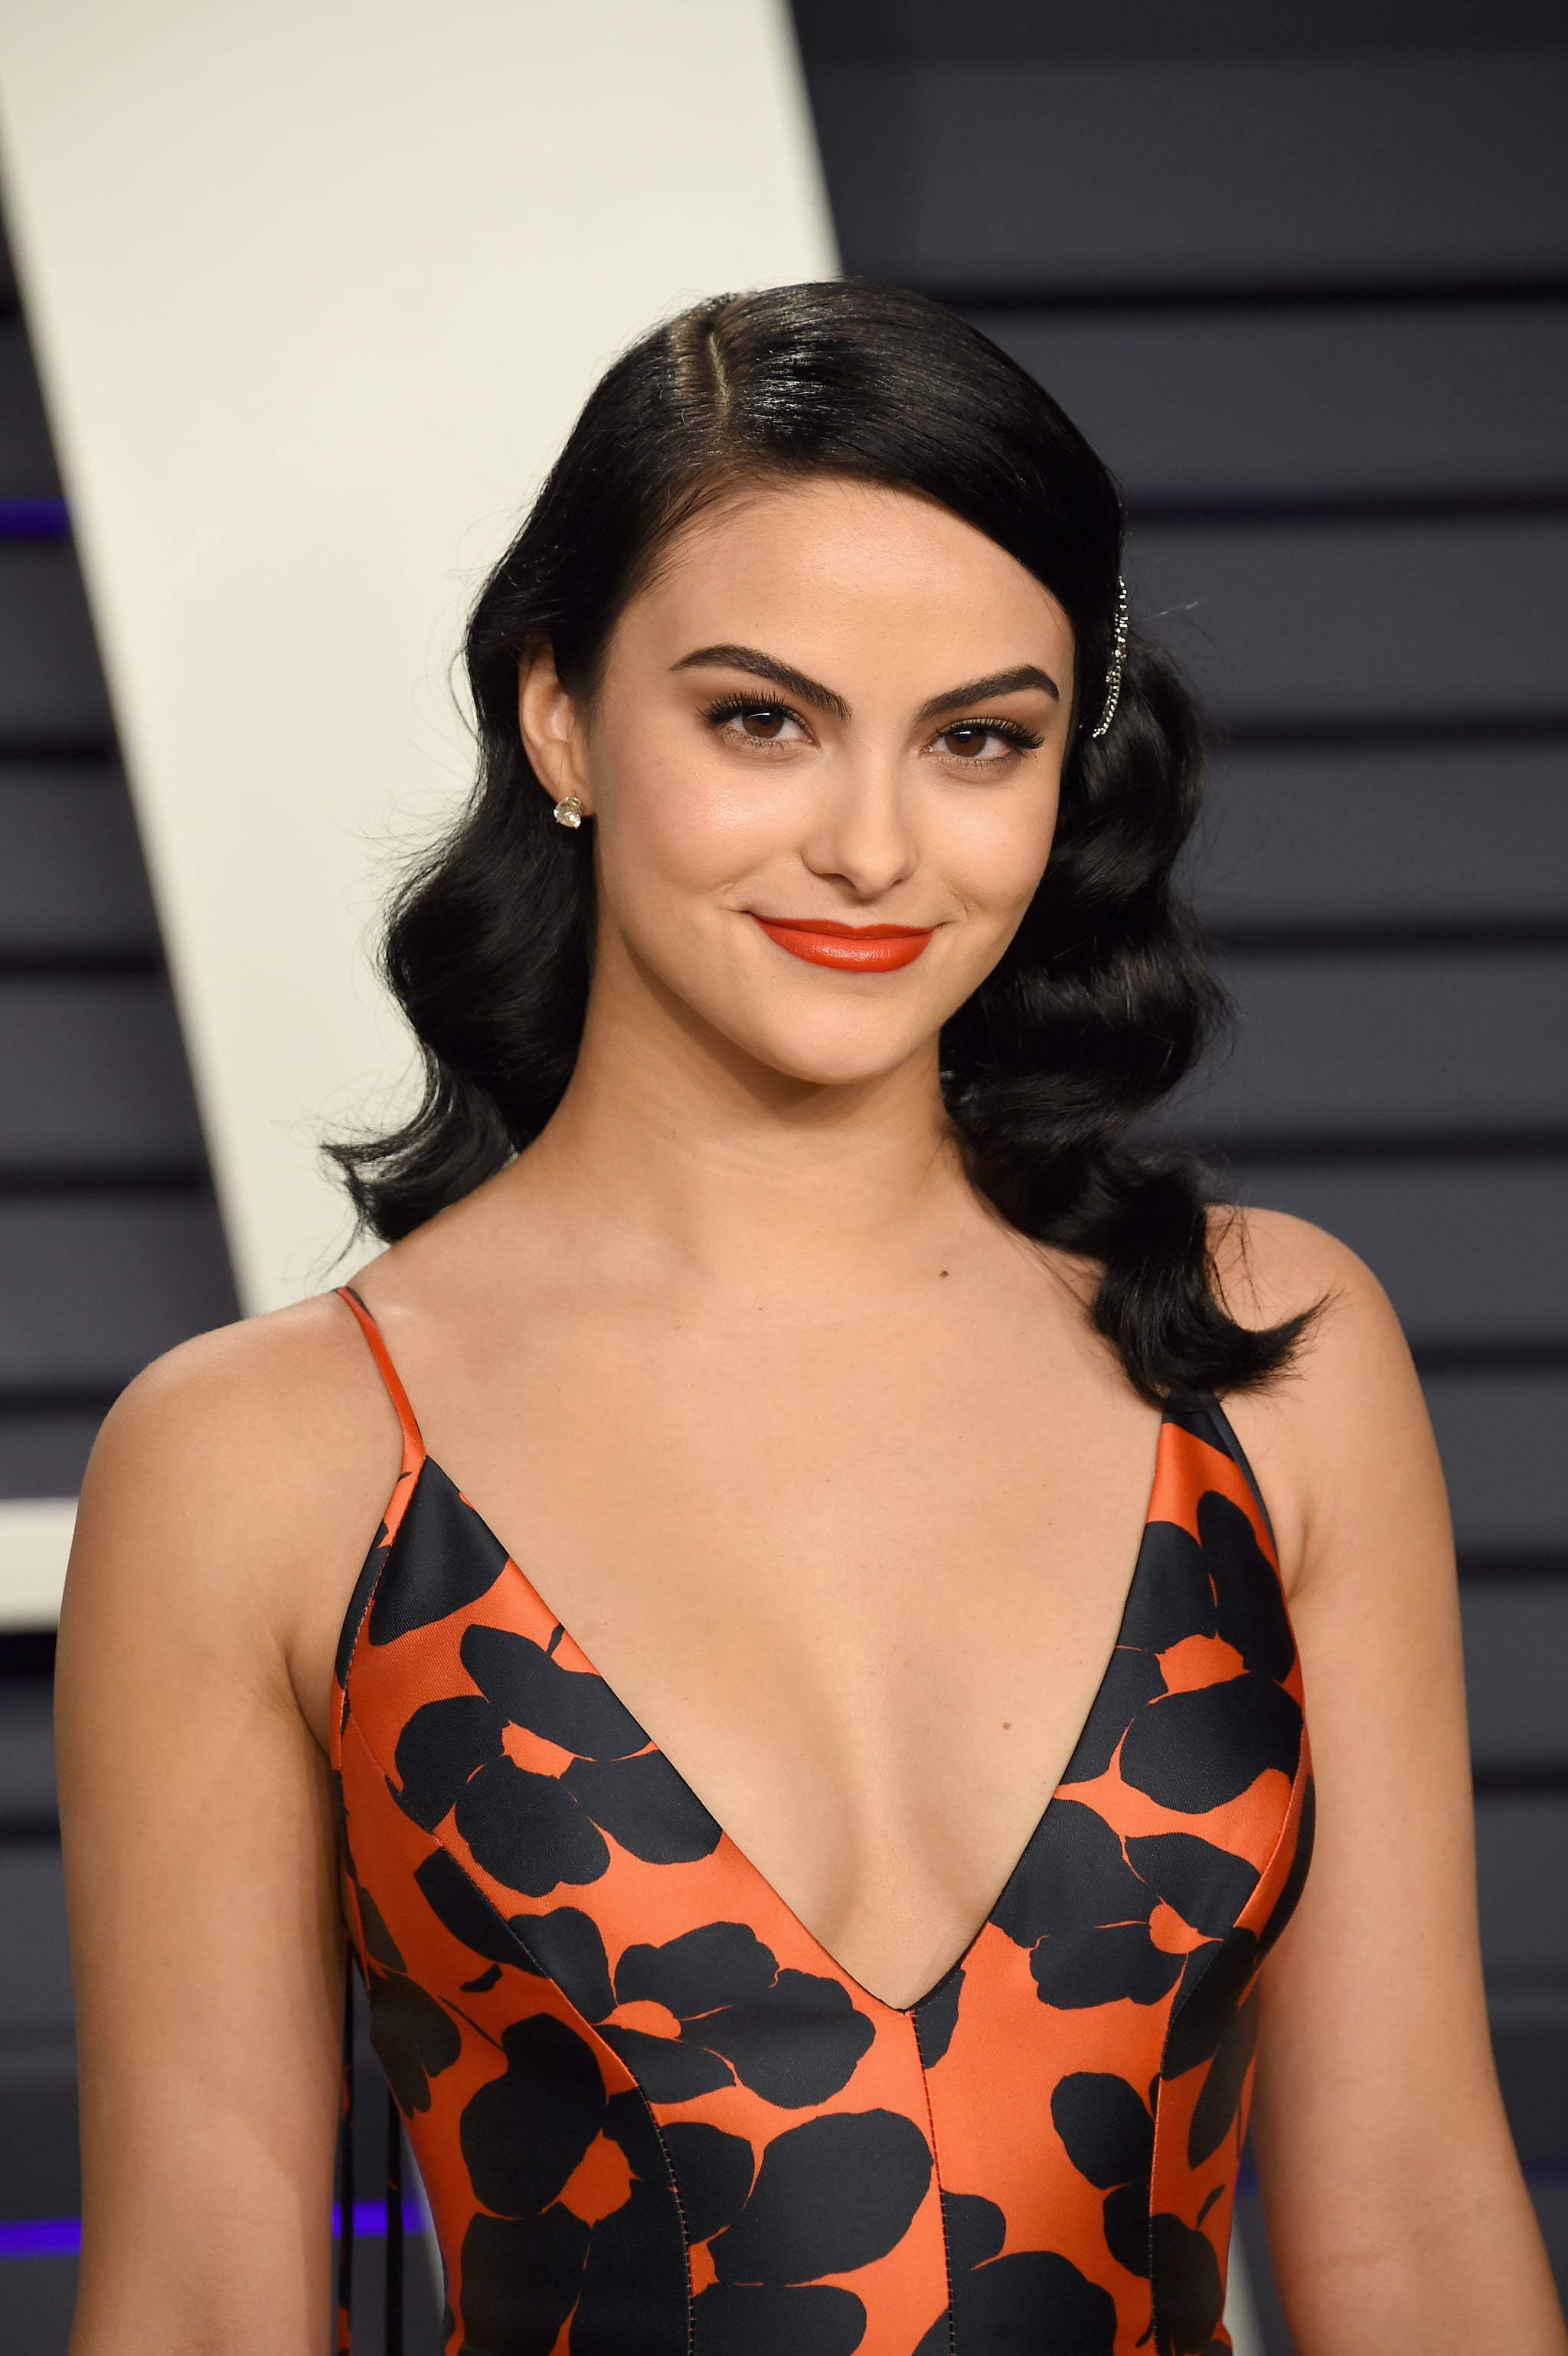 BEVERLY HILLS, CA - FEBRUARY 24:  Camila Mendes attends the 2019 Vanity Fair Oscar Party hosted by Radhika Jones at Wallis Annenberg Center for the Performing Arts on February 24, 2019 in Beverly Hills, California.  (Photo by Gregg DeGuire/FilmMagic)